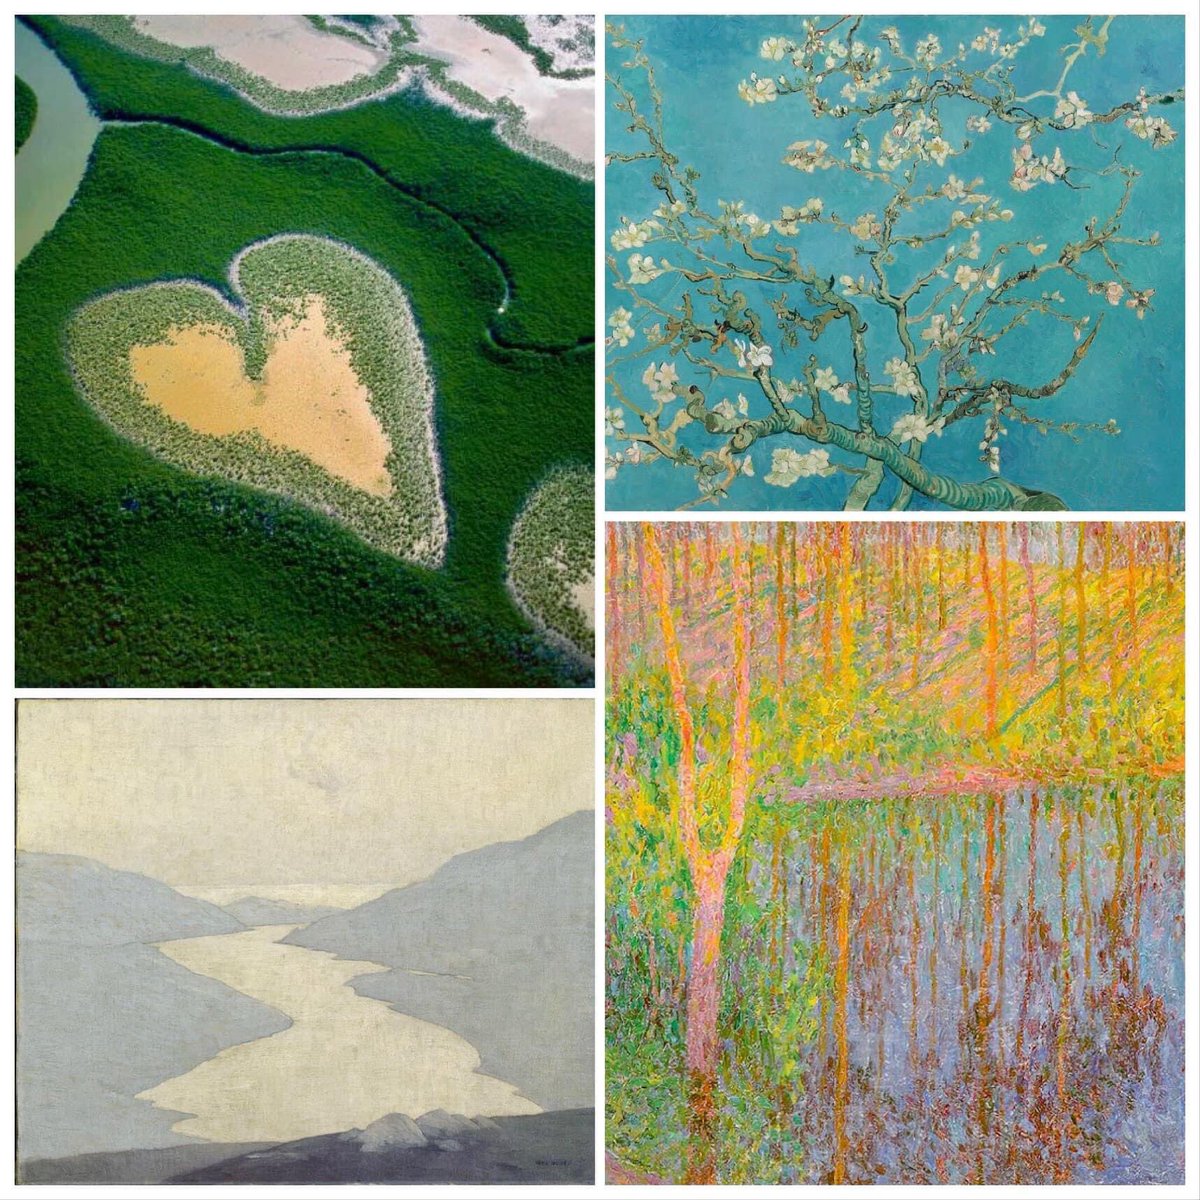 A bit late for #EarthDay2022 which was yesterday but here are some artworks that remind me of the beautiful planet we live on.🌍🌎 #Art 🖼 🎨 #EarthDay #Monet #VanGogh #Hokusai #Klimt #PaulHenry #LévyDhurmer #PaulCézanne #CasparDavidFriedrich #YannArthusBertrand #HenriEdmondCross